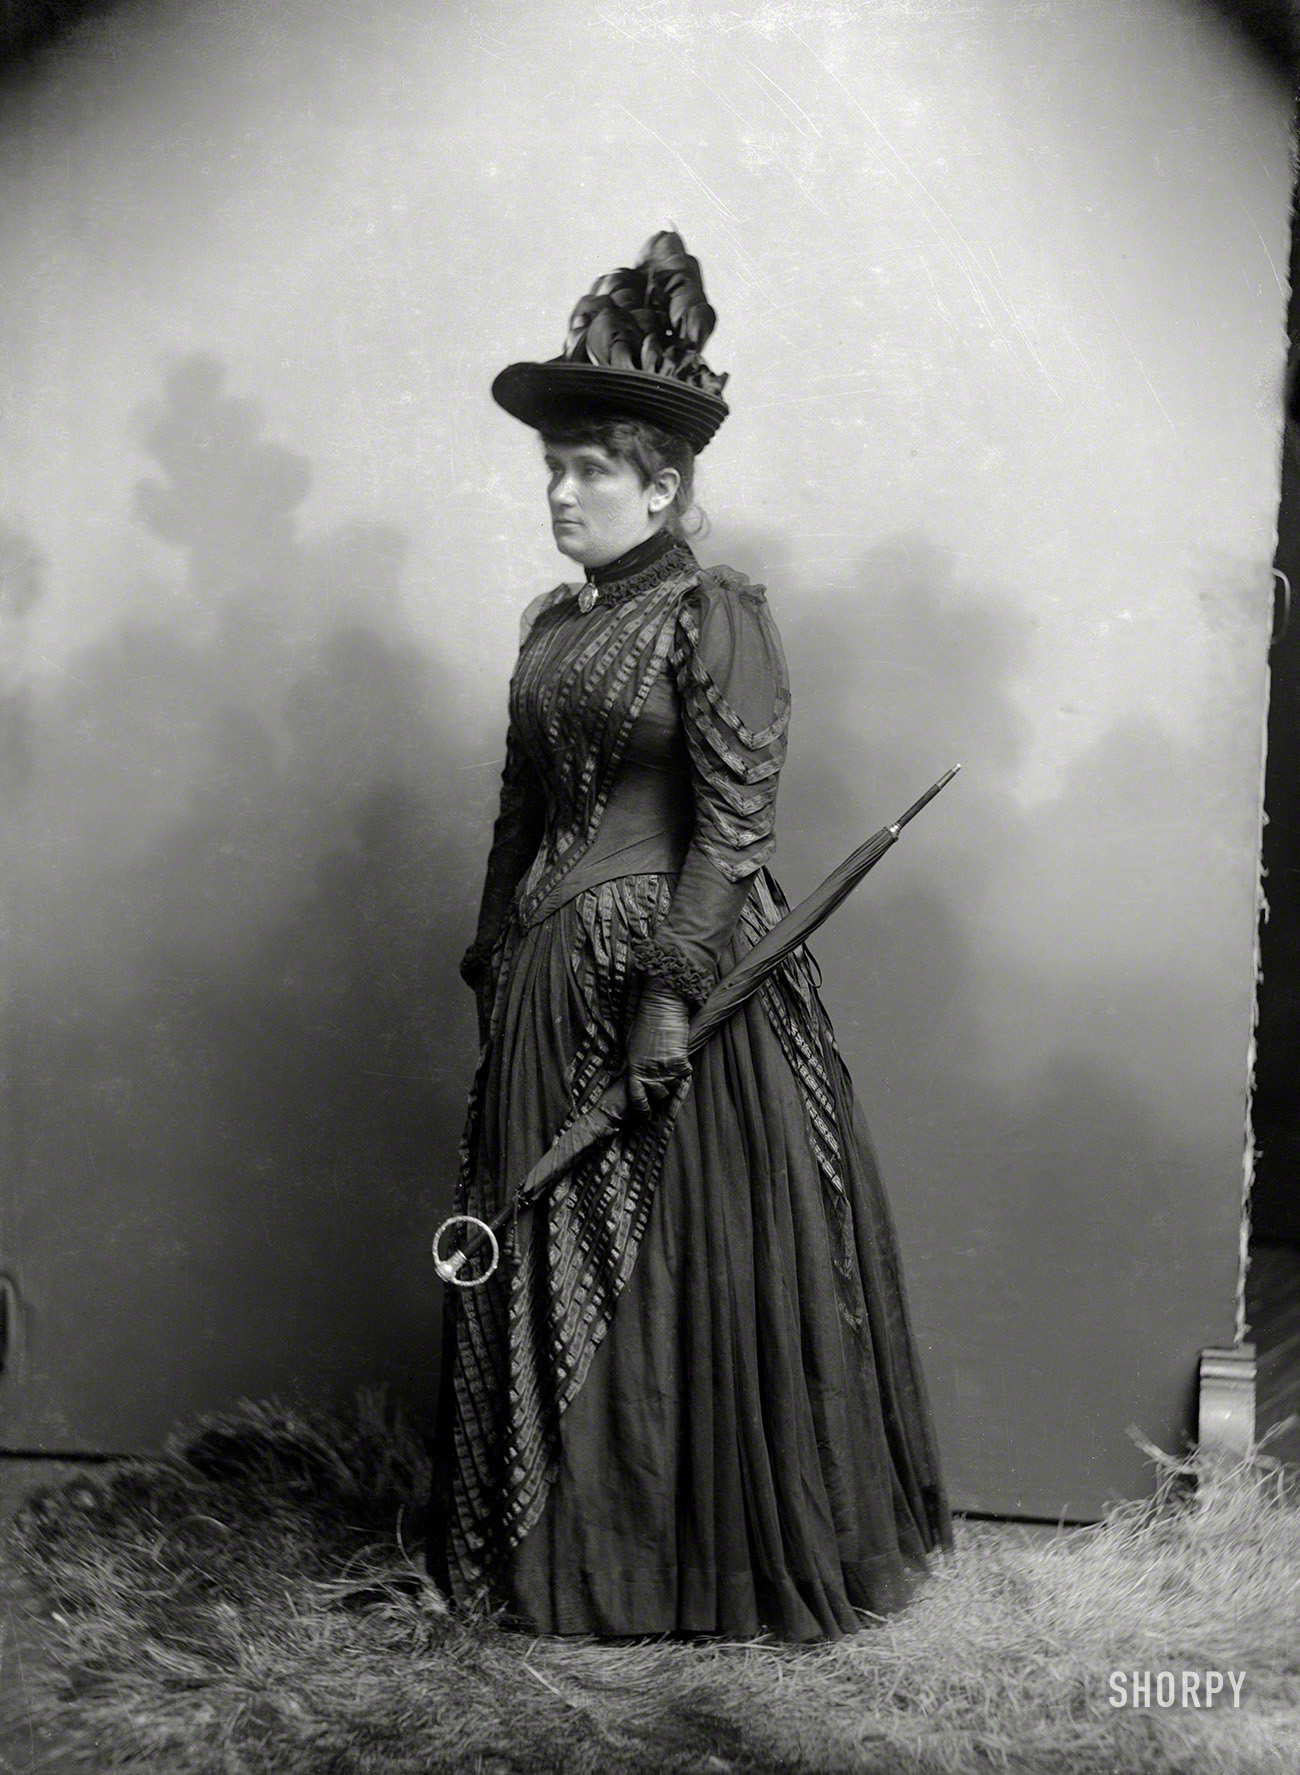 Washington, D.C., circa 1890. "Mad. Aragon." That's Madame to you, bub. 5x7 inch glass negative from the C.M. Bell portrait studio. View full size.